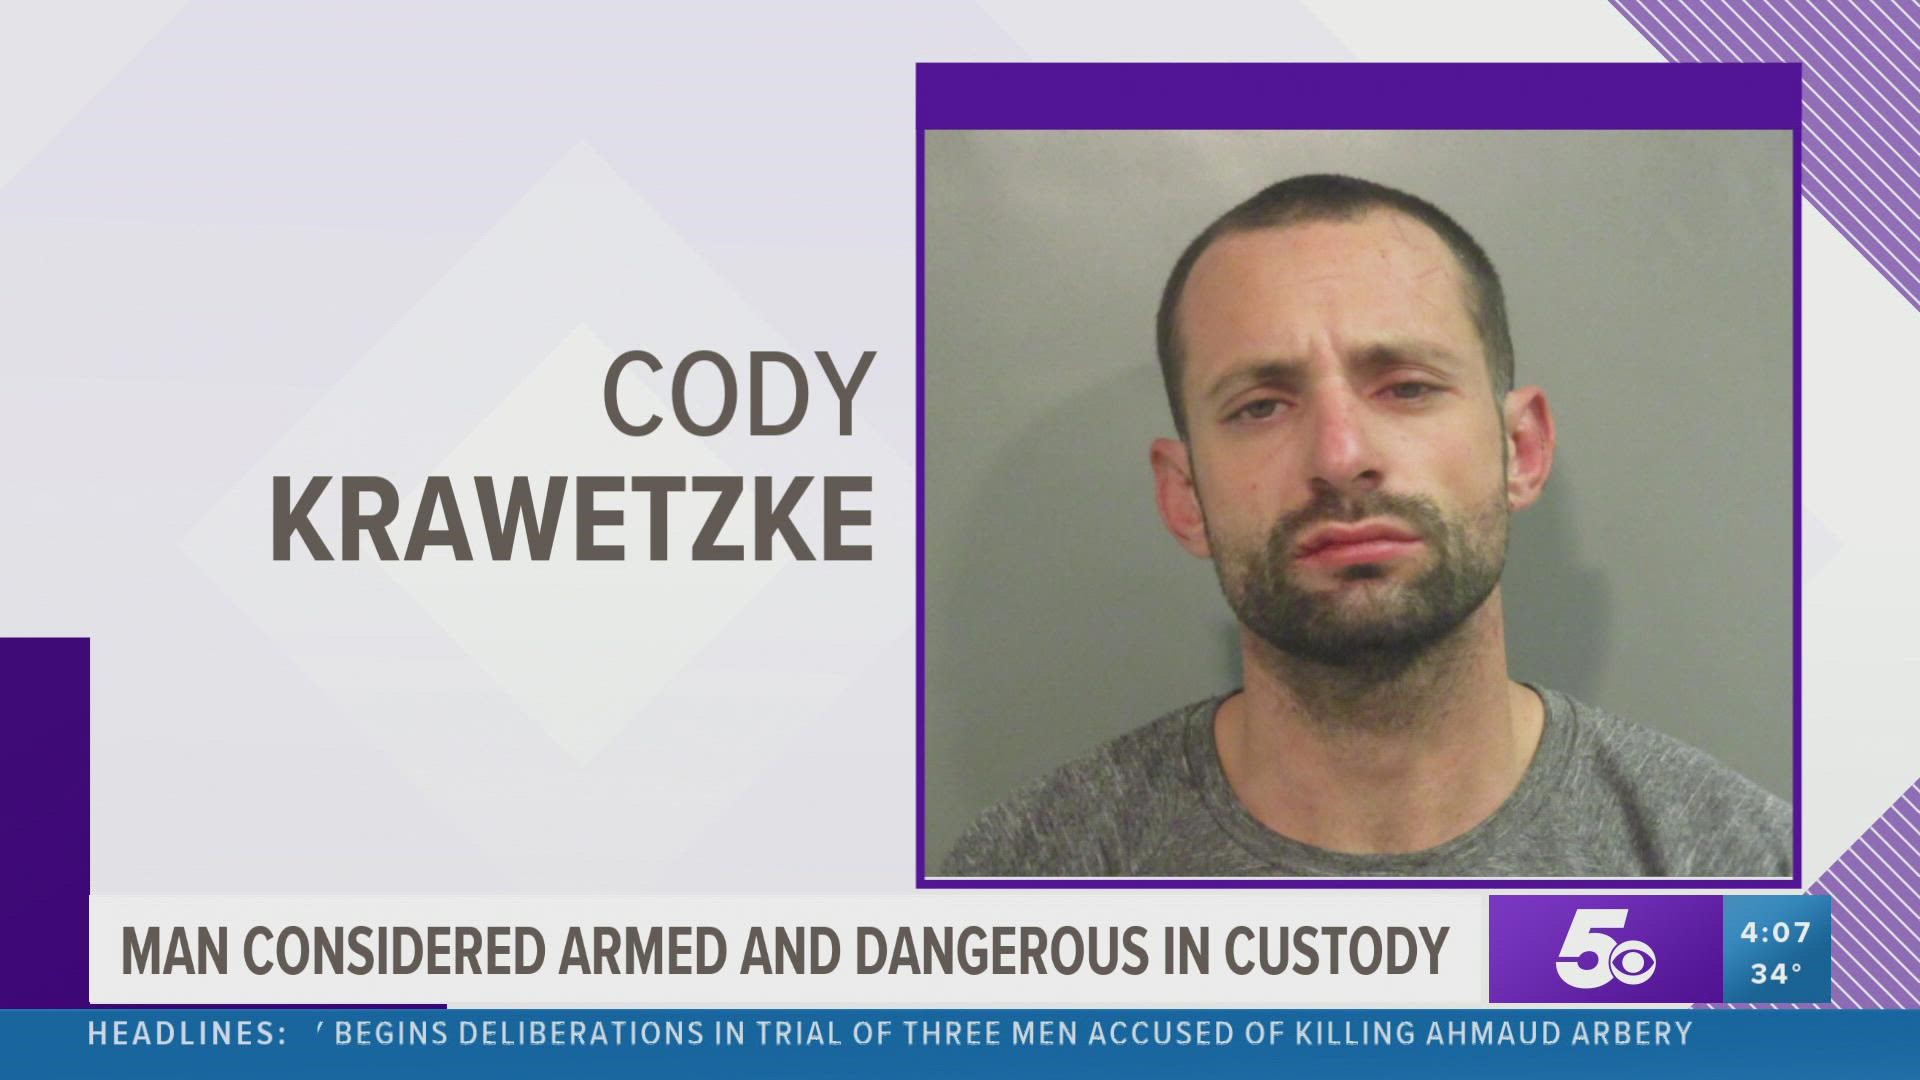 The Crawford County Sheriff’s Office says a suspect considered to be armed and dangerous has been taken into custody after several agencies assisted in the search.